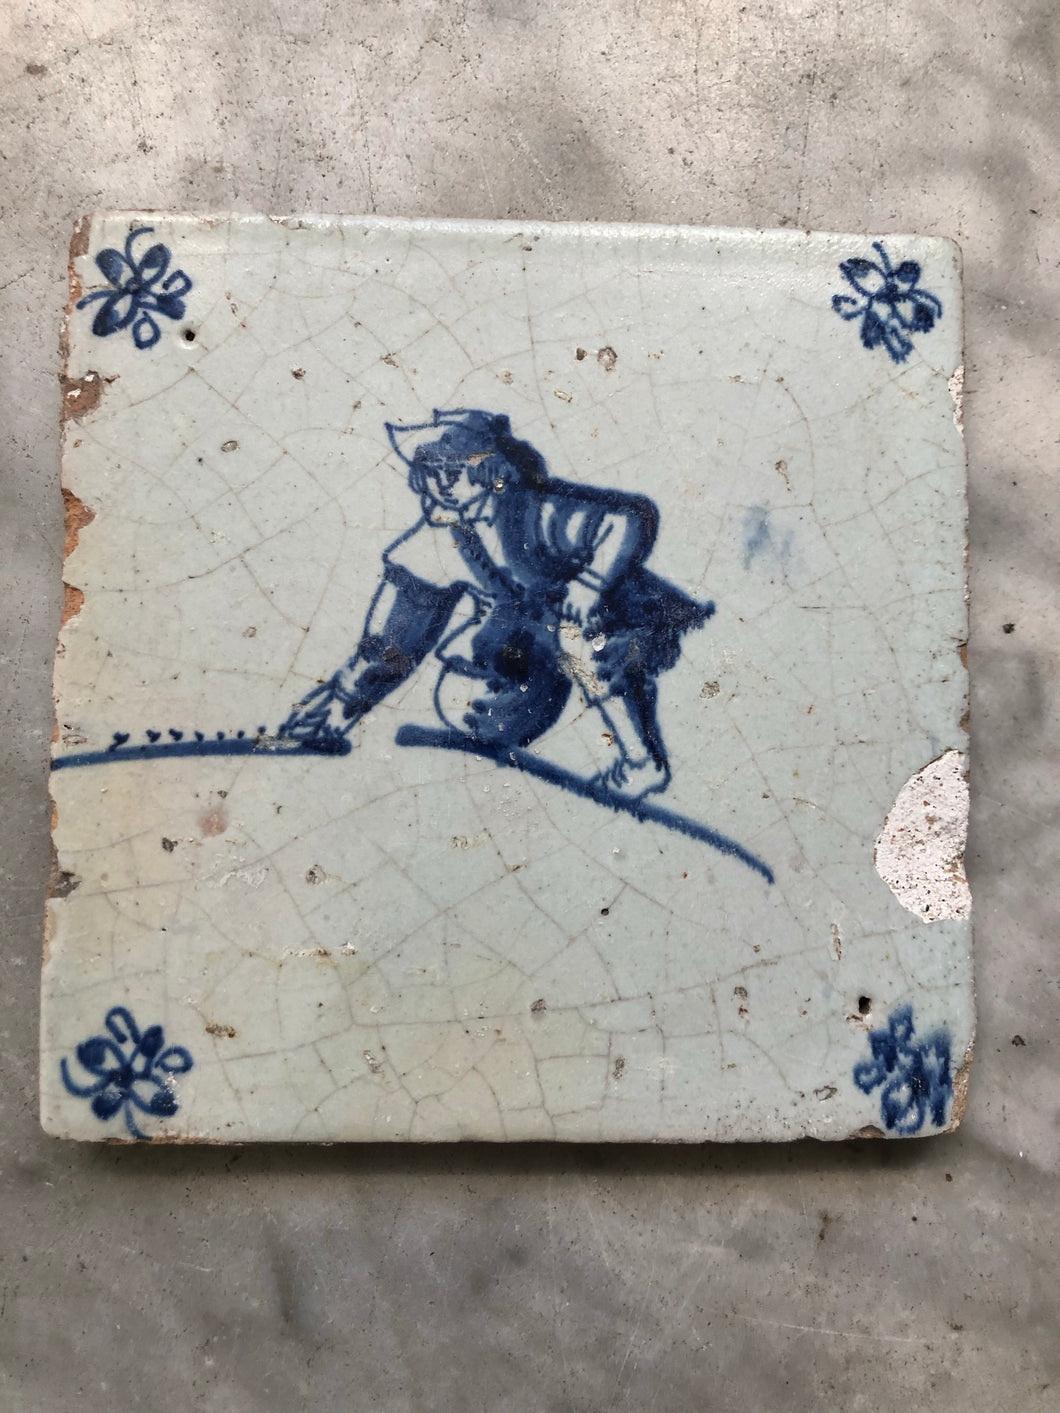 Delft handpainted dutch tile with boy playing with a marble